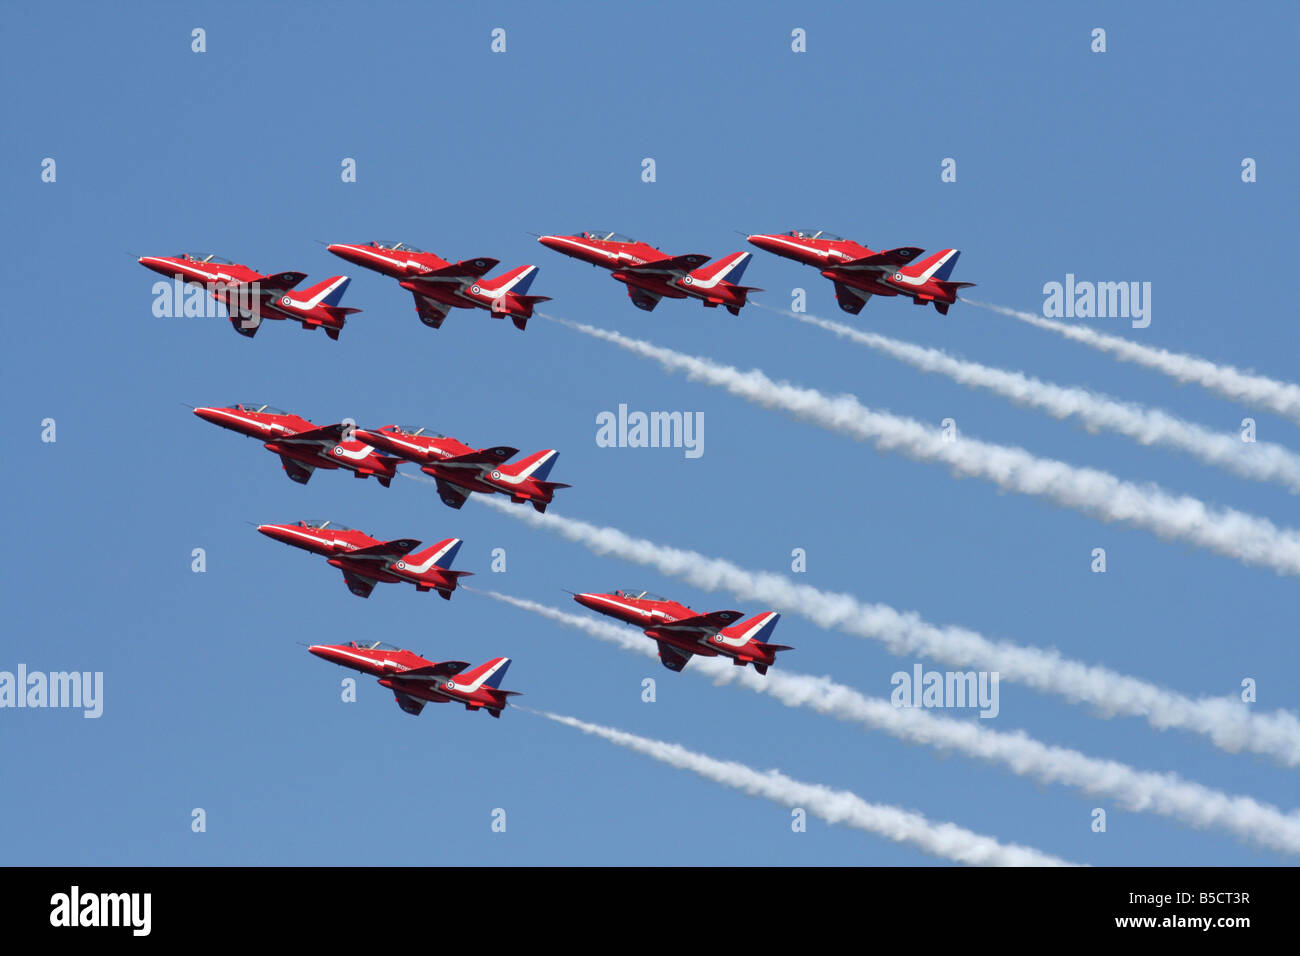 The Royal Air Force Red Arrows aerobatic team flying in formation and generating smoke trails Stock Photo